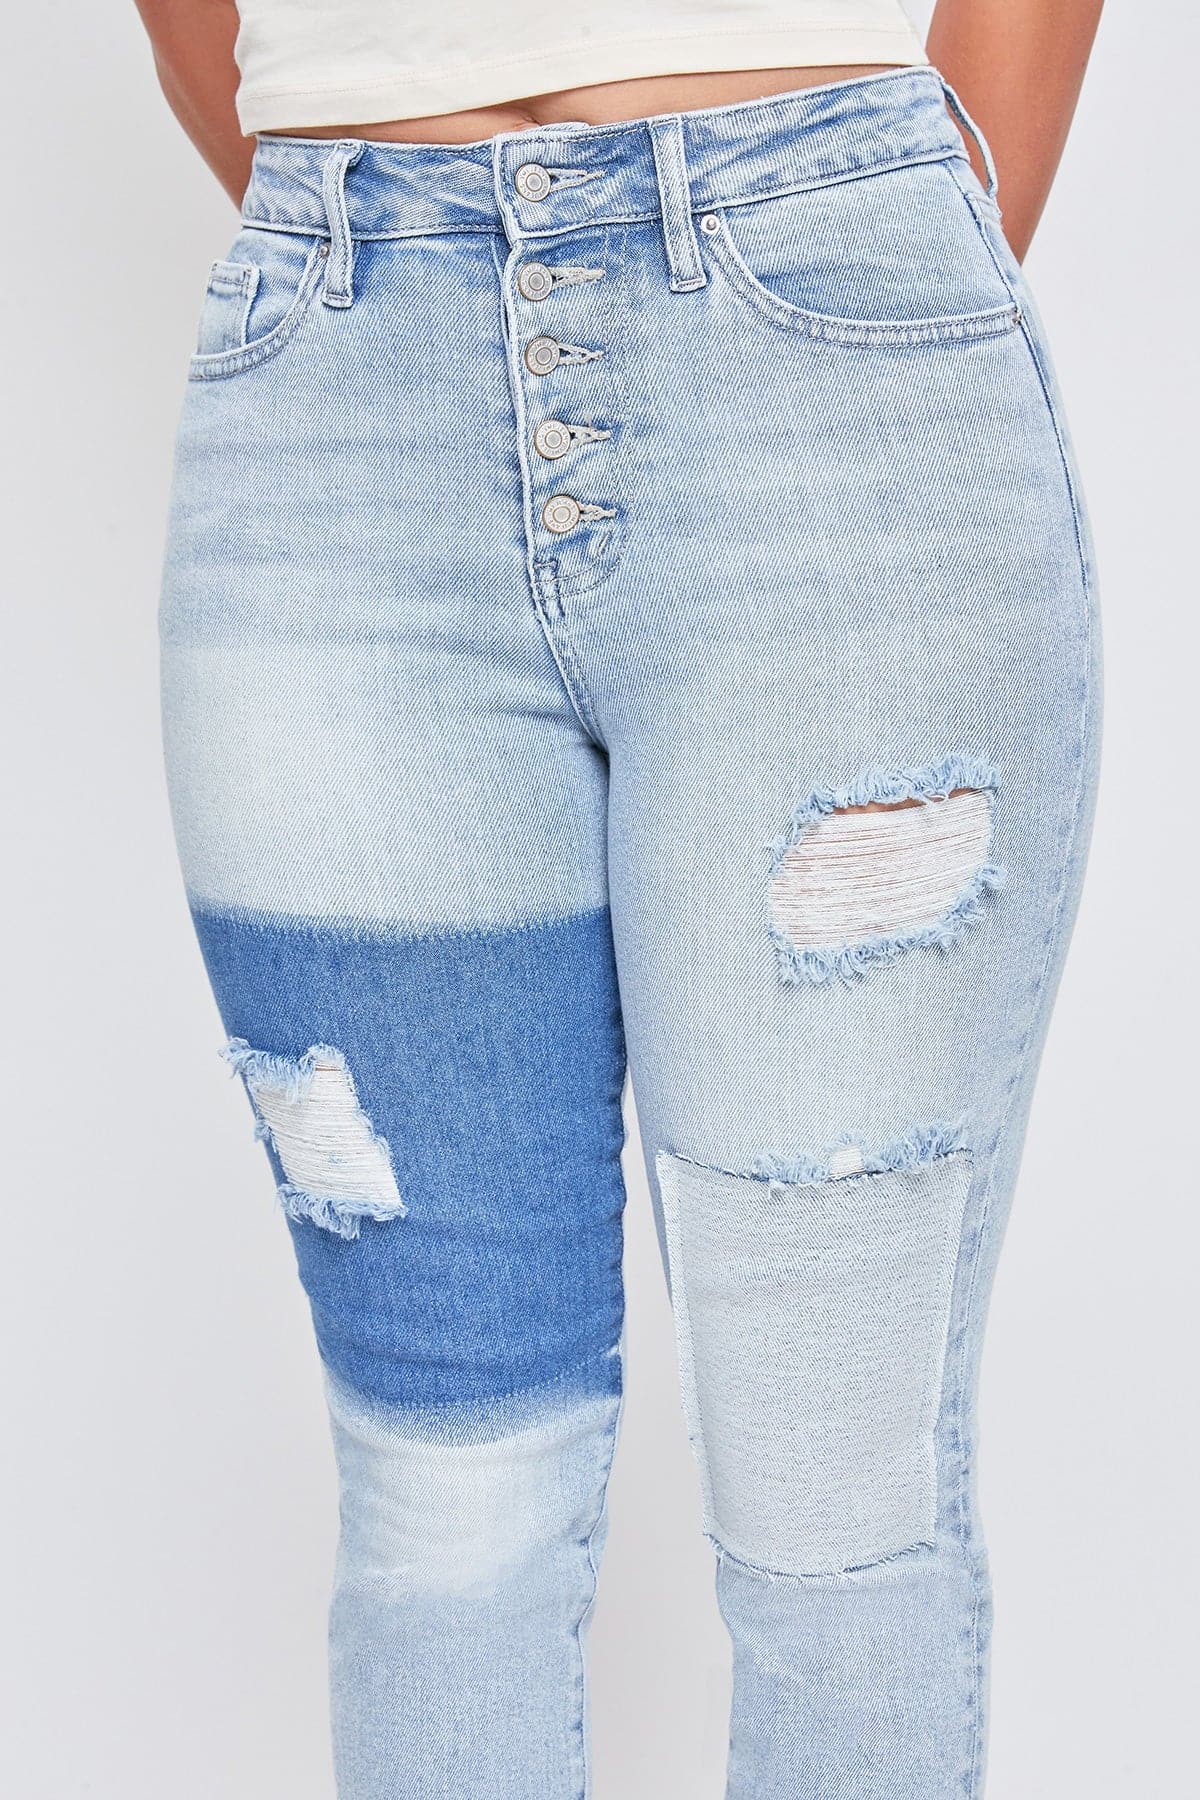 Women’s Vintage Dream Exposed Button Fly Raw Hem Ankle Jeans